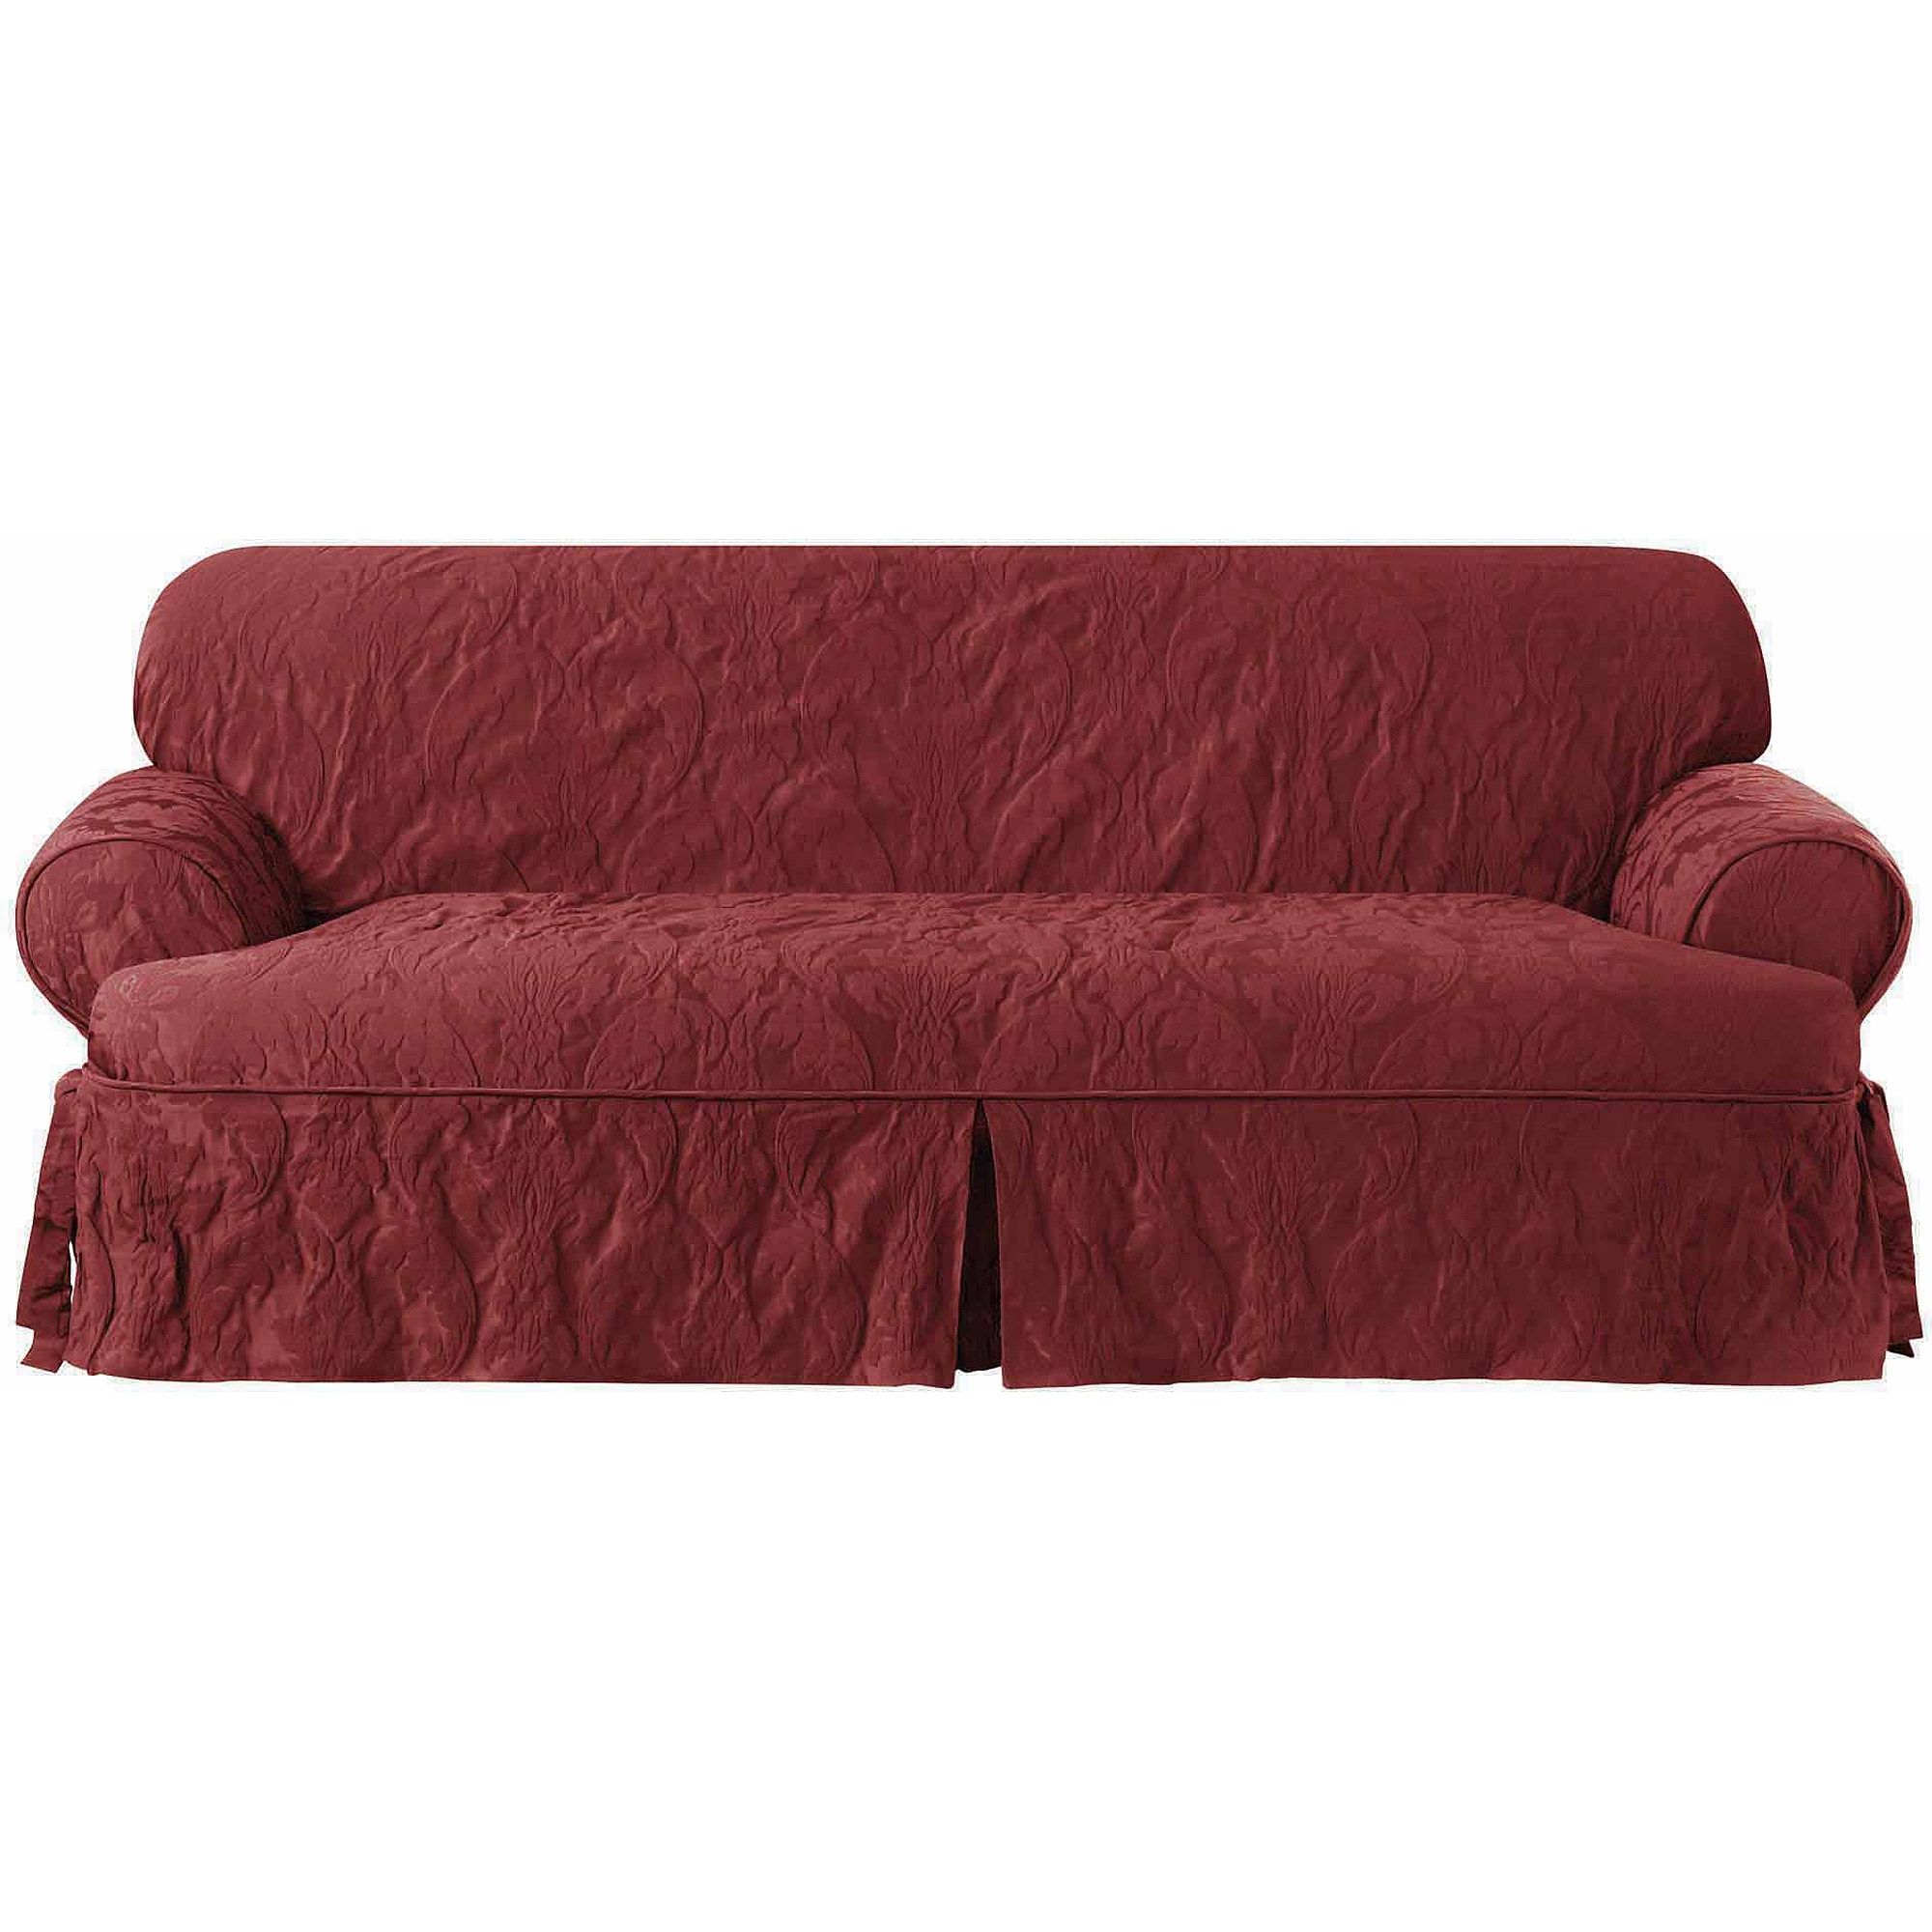 Sure Fit Sofa Slipcovers Inside 3 Piece Sectional Sofa Slipcovers (View 2 of 15)